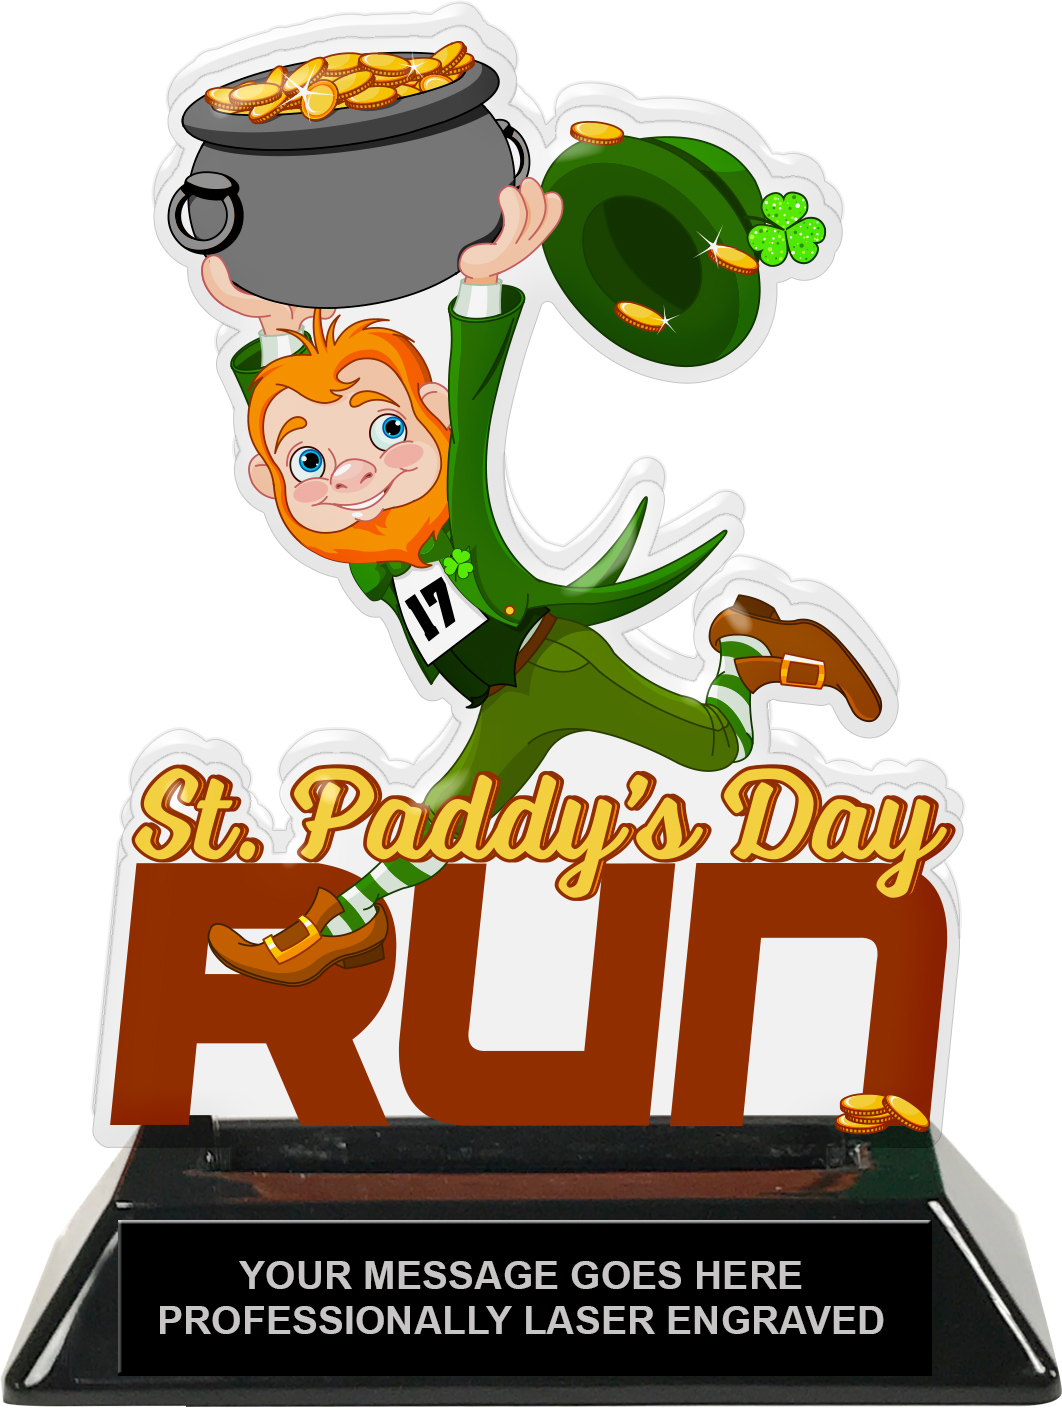 St. Paddy's Day Run Colorix-T Acrylic Trophy - 6.25 inch